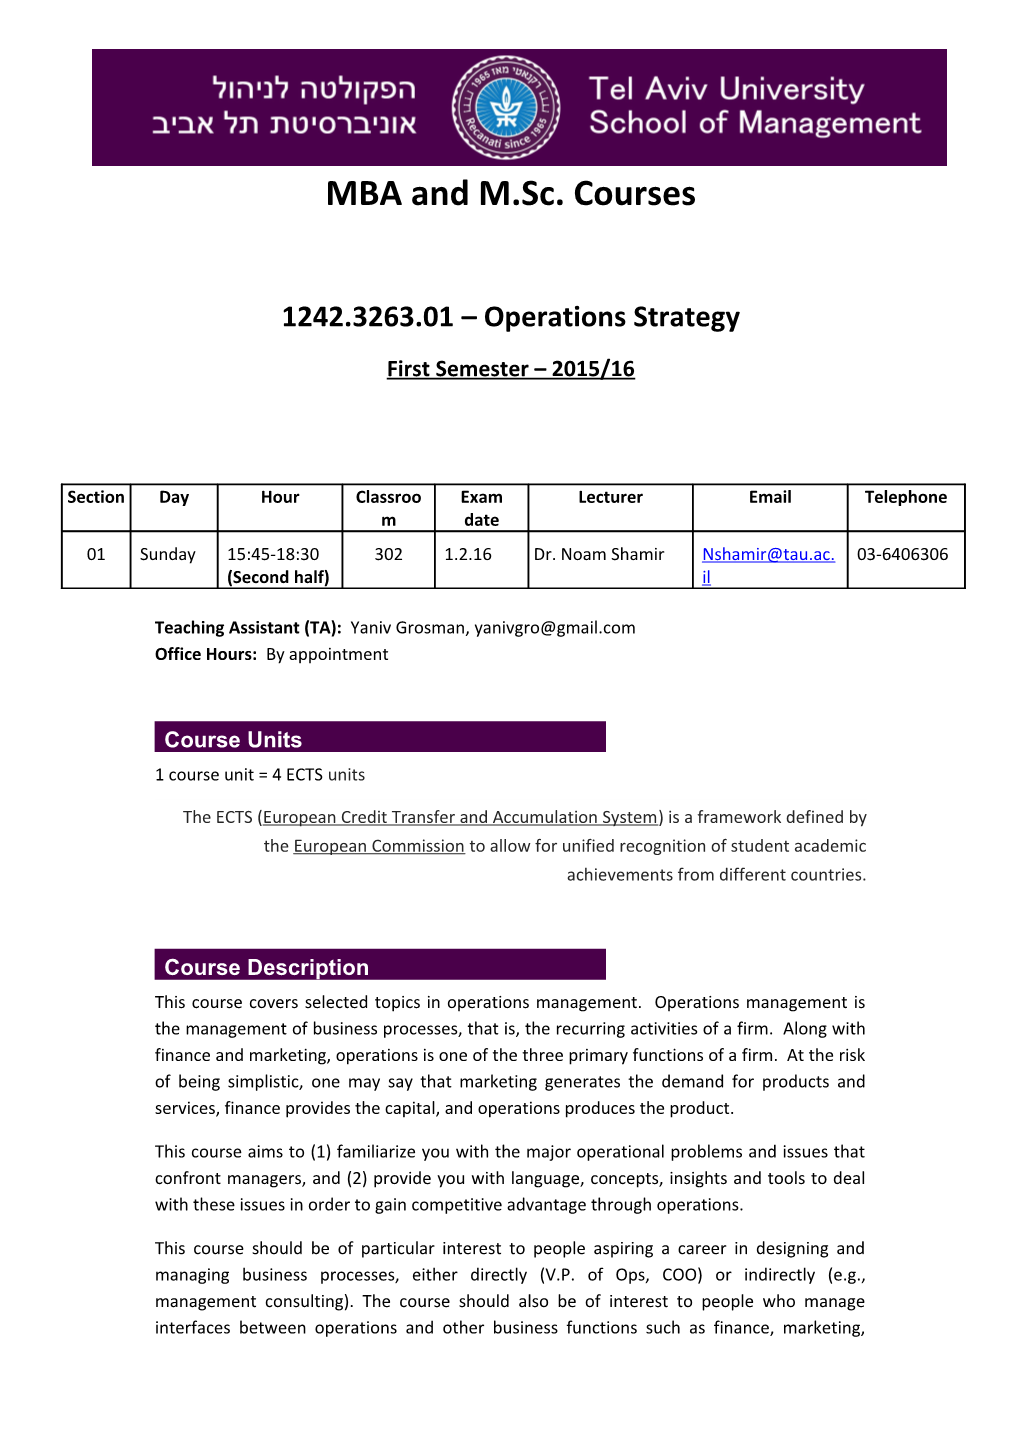 1242.3263.01 Operations Strategy